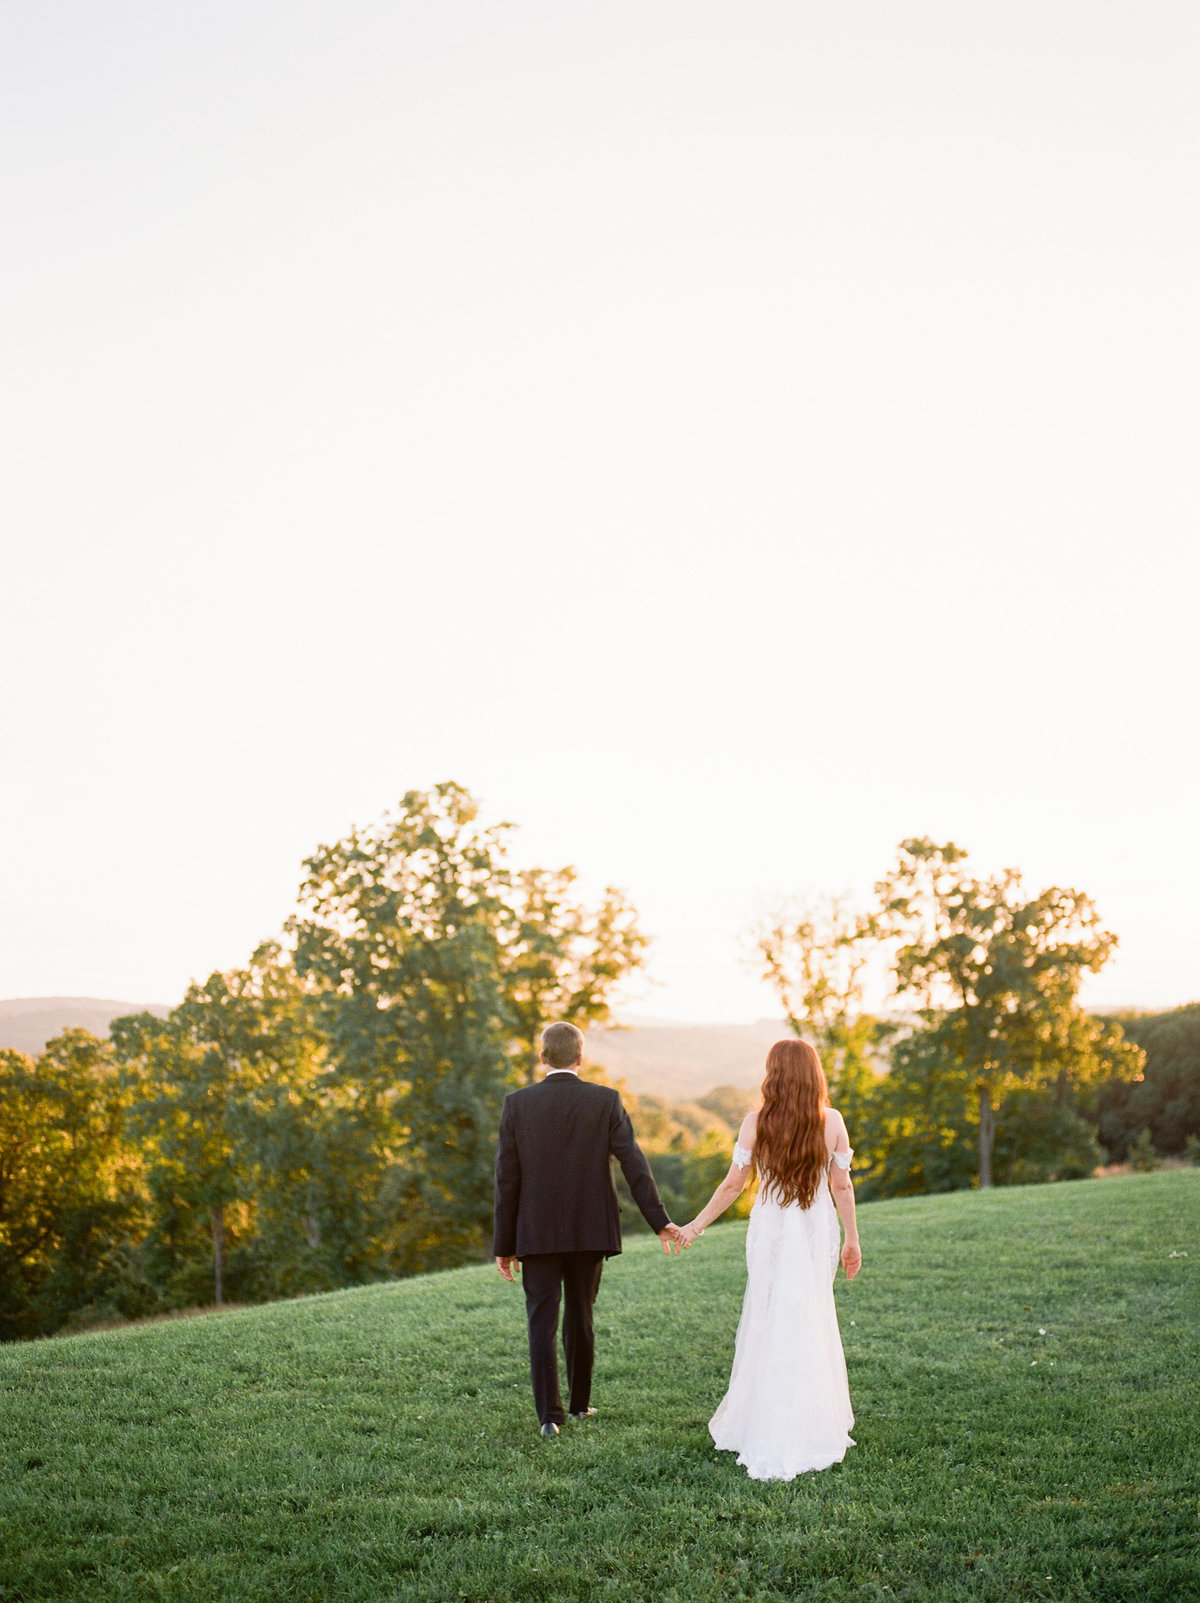 bride and groom holding hands in grassy field on philadelphia wedding day